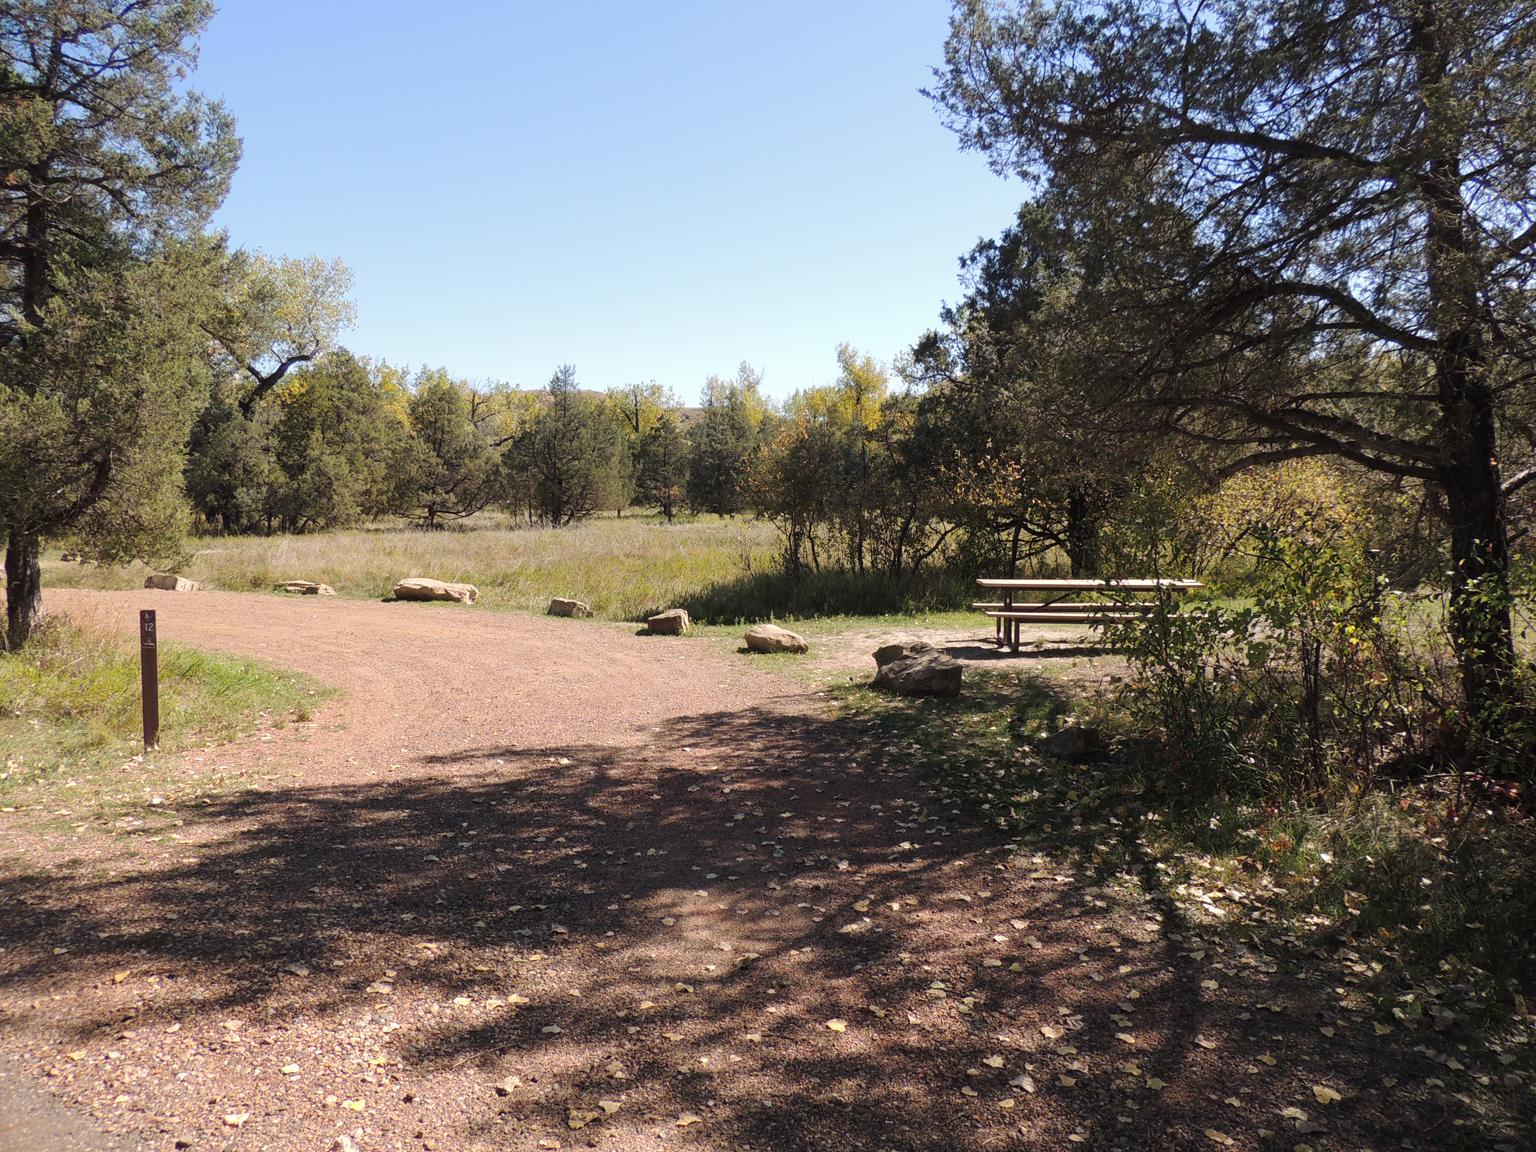 A curved gravel parking pad lined with boulders and an adjacent campsite and picnic table.